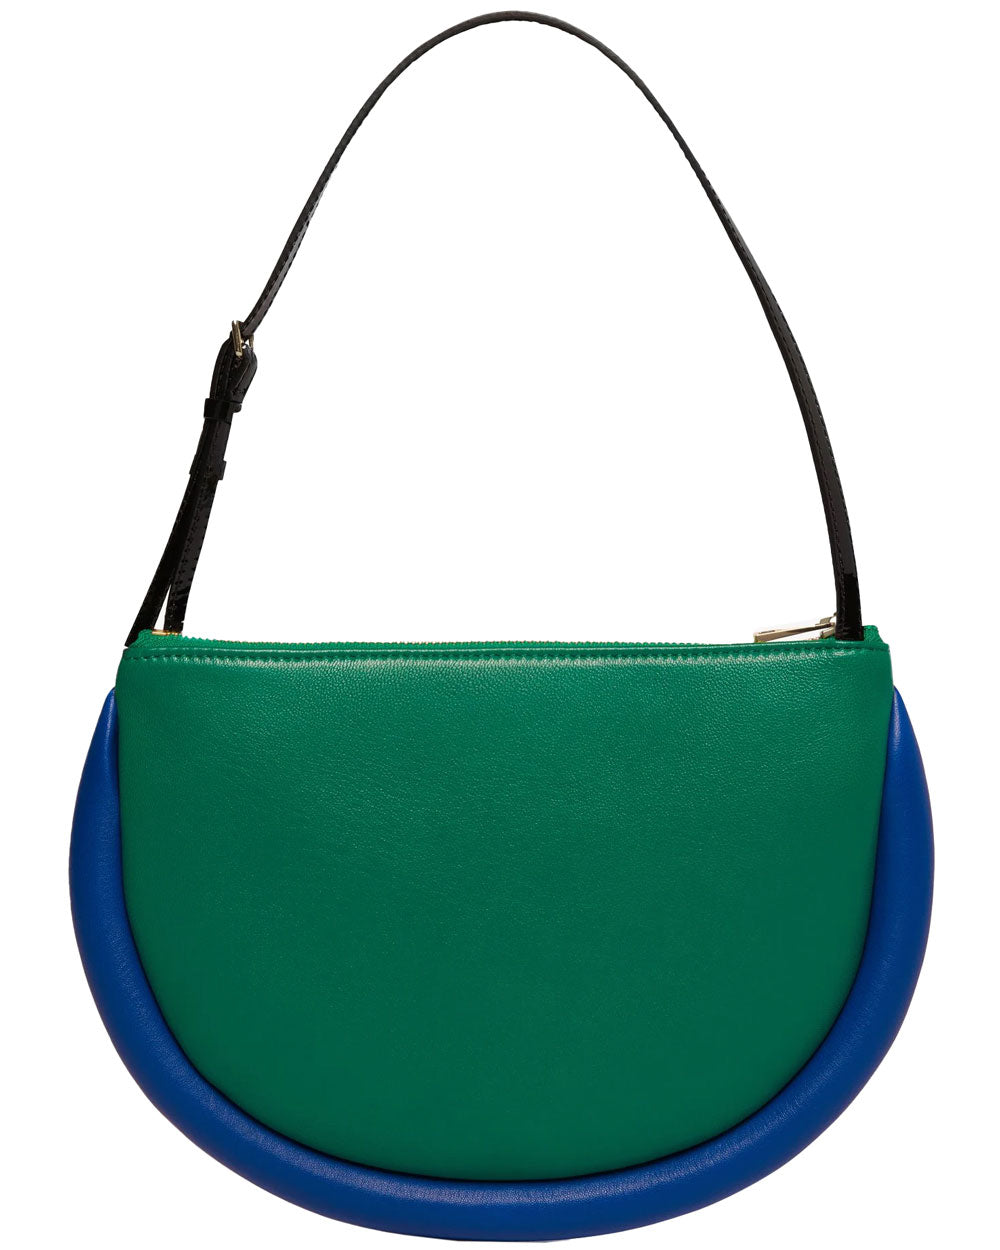 The Bumper Moon Bag in Green and Cobalt